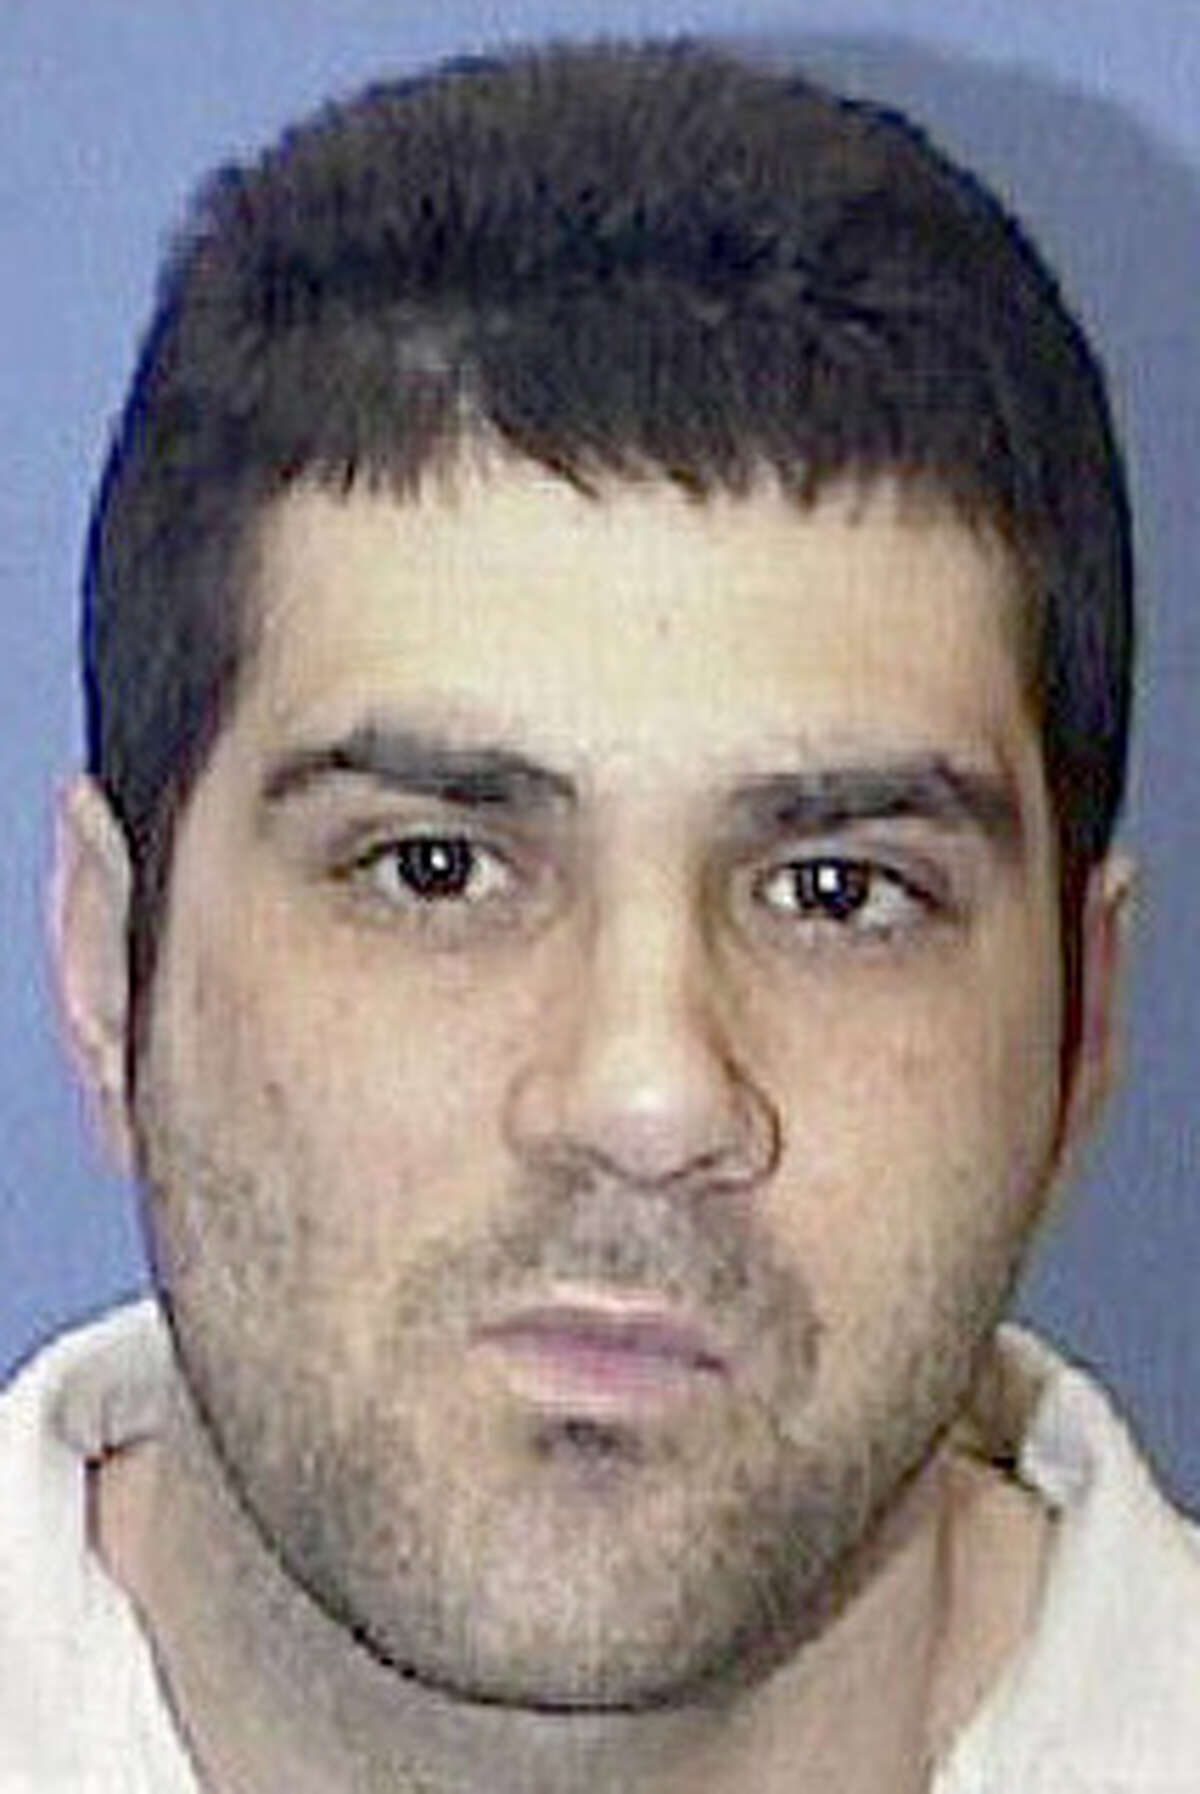 Cameron Todd Willingham was executed in 2004. Since then, there have been mounting doubts of his guilt.